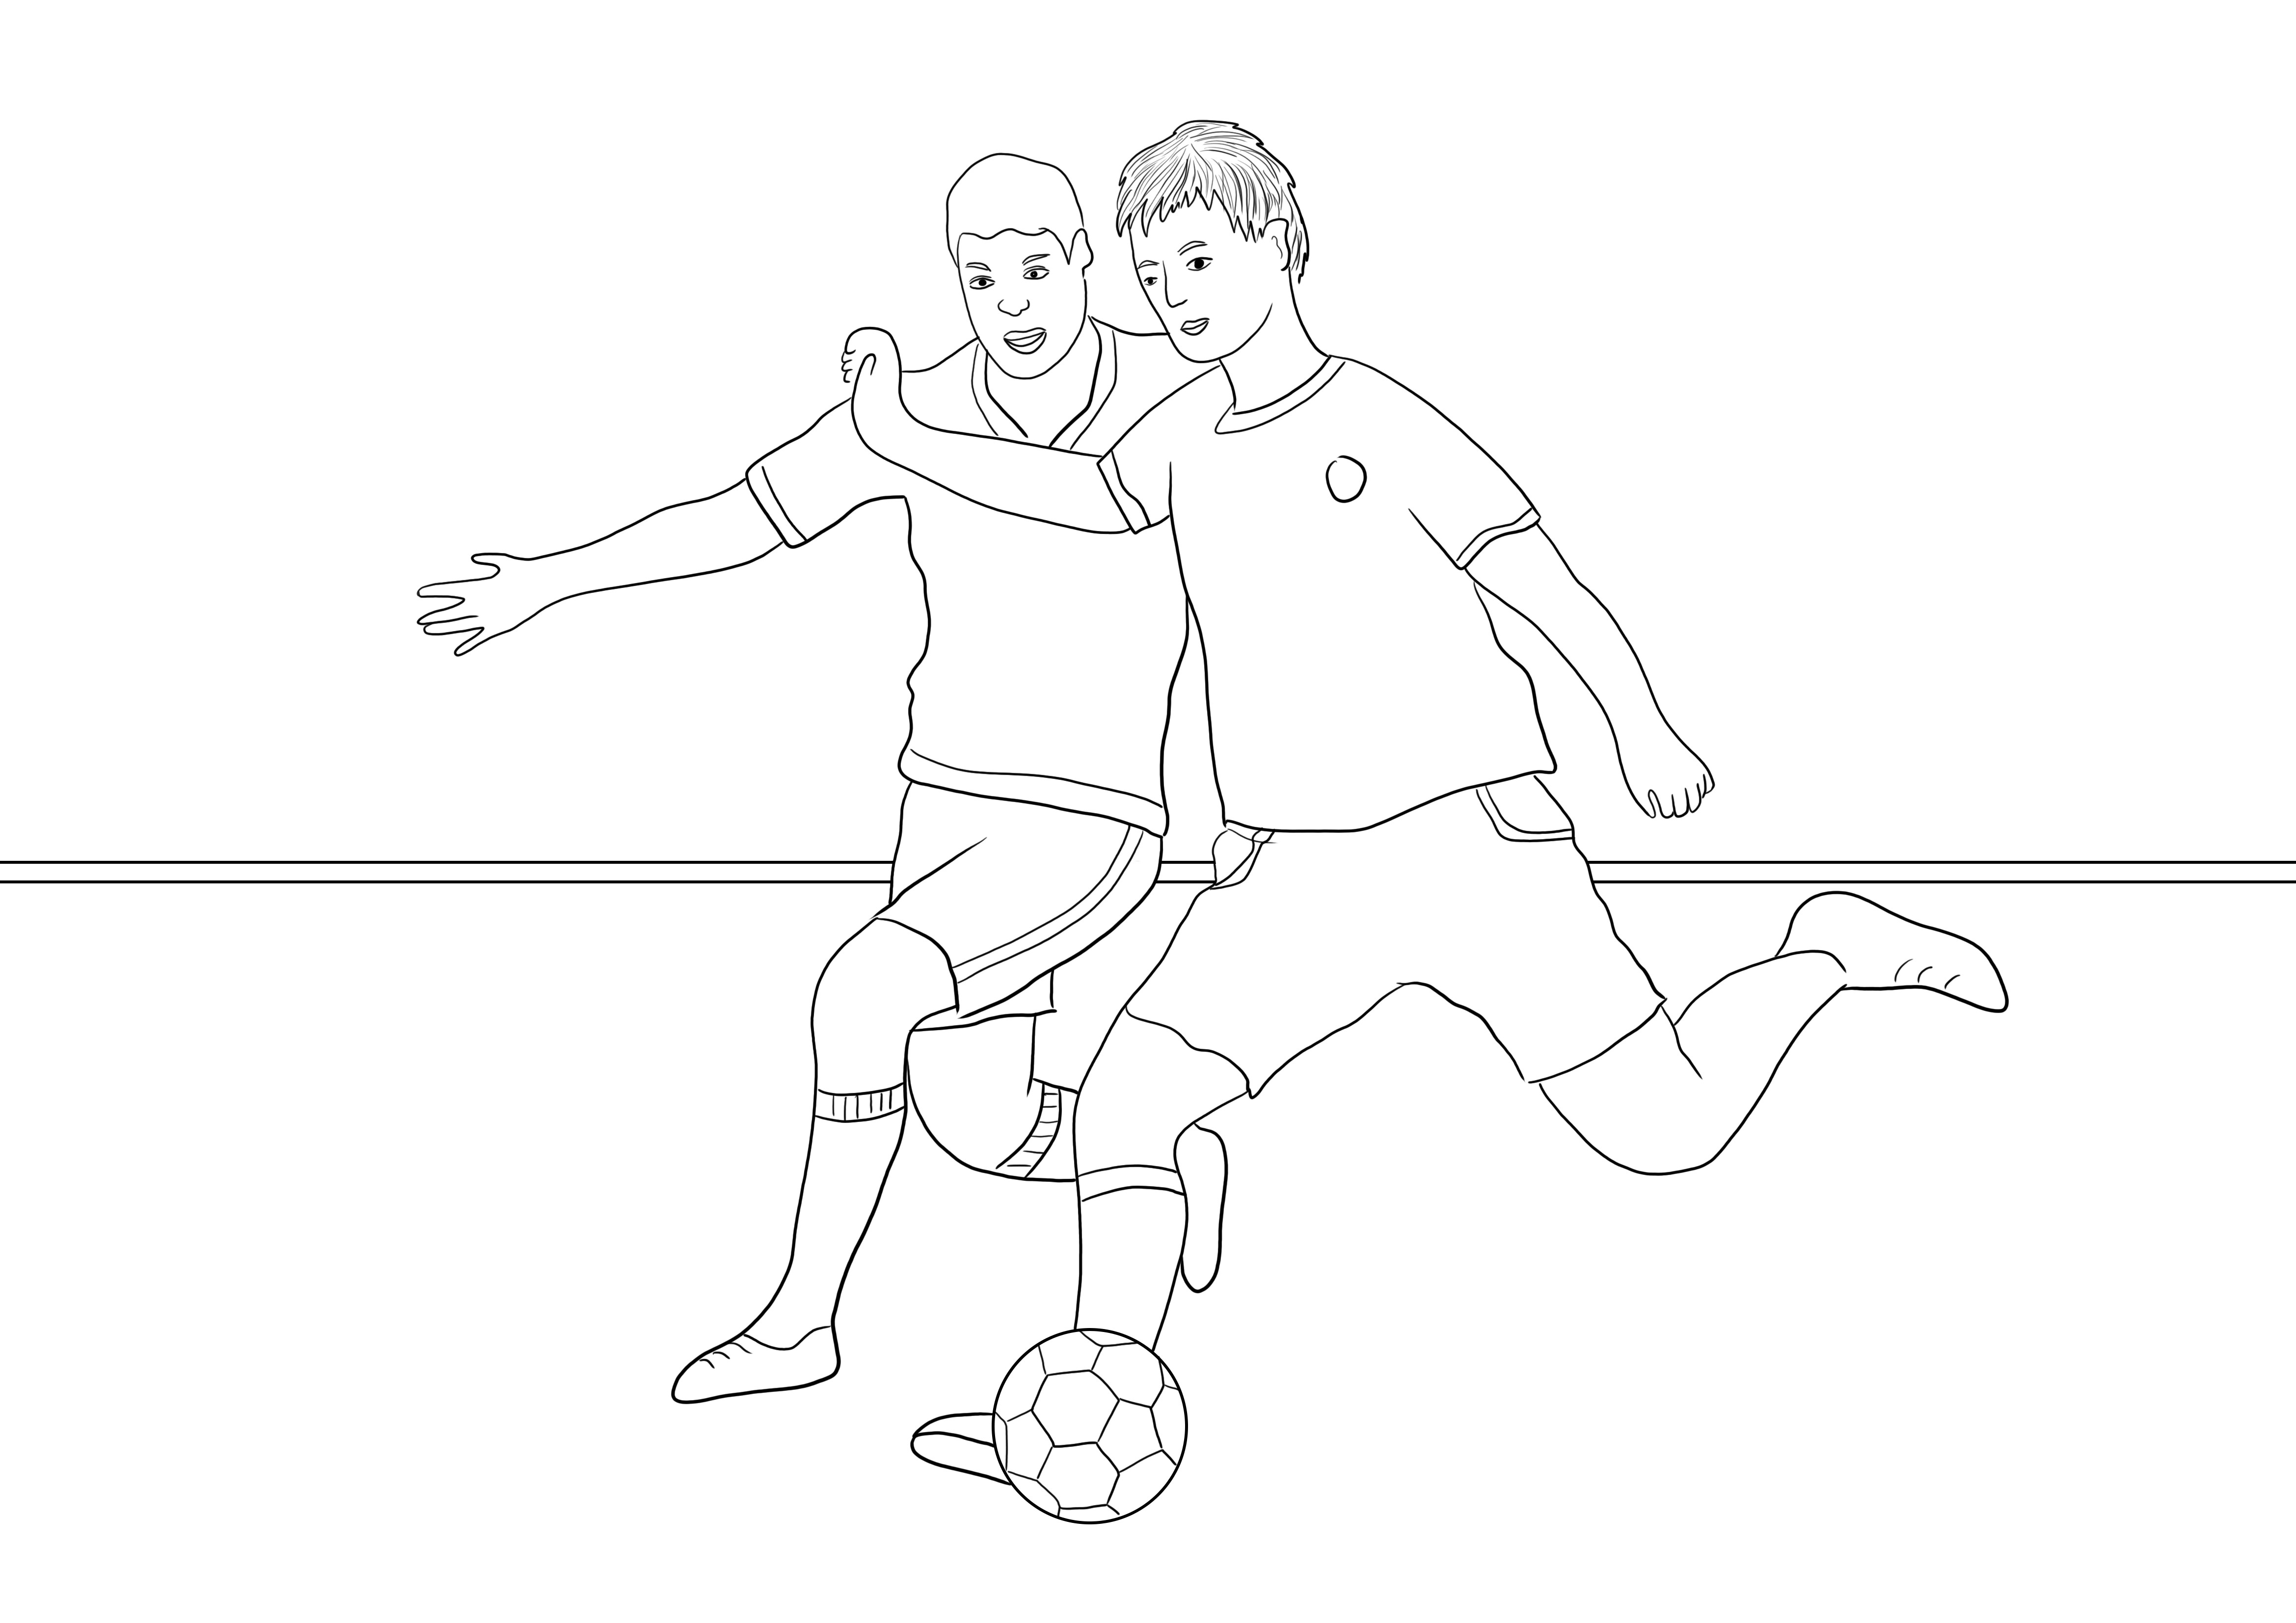 Free downloading of two running soccer players for easy coloring